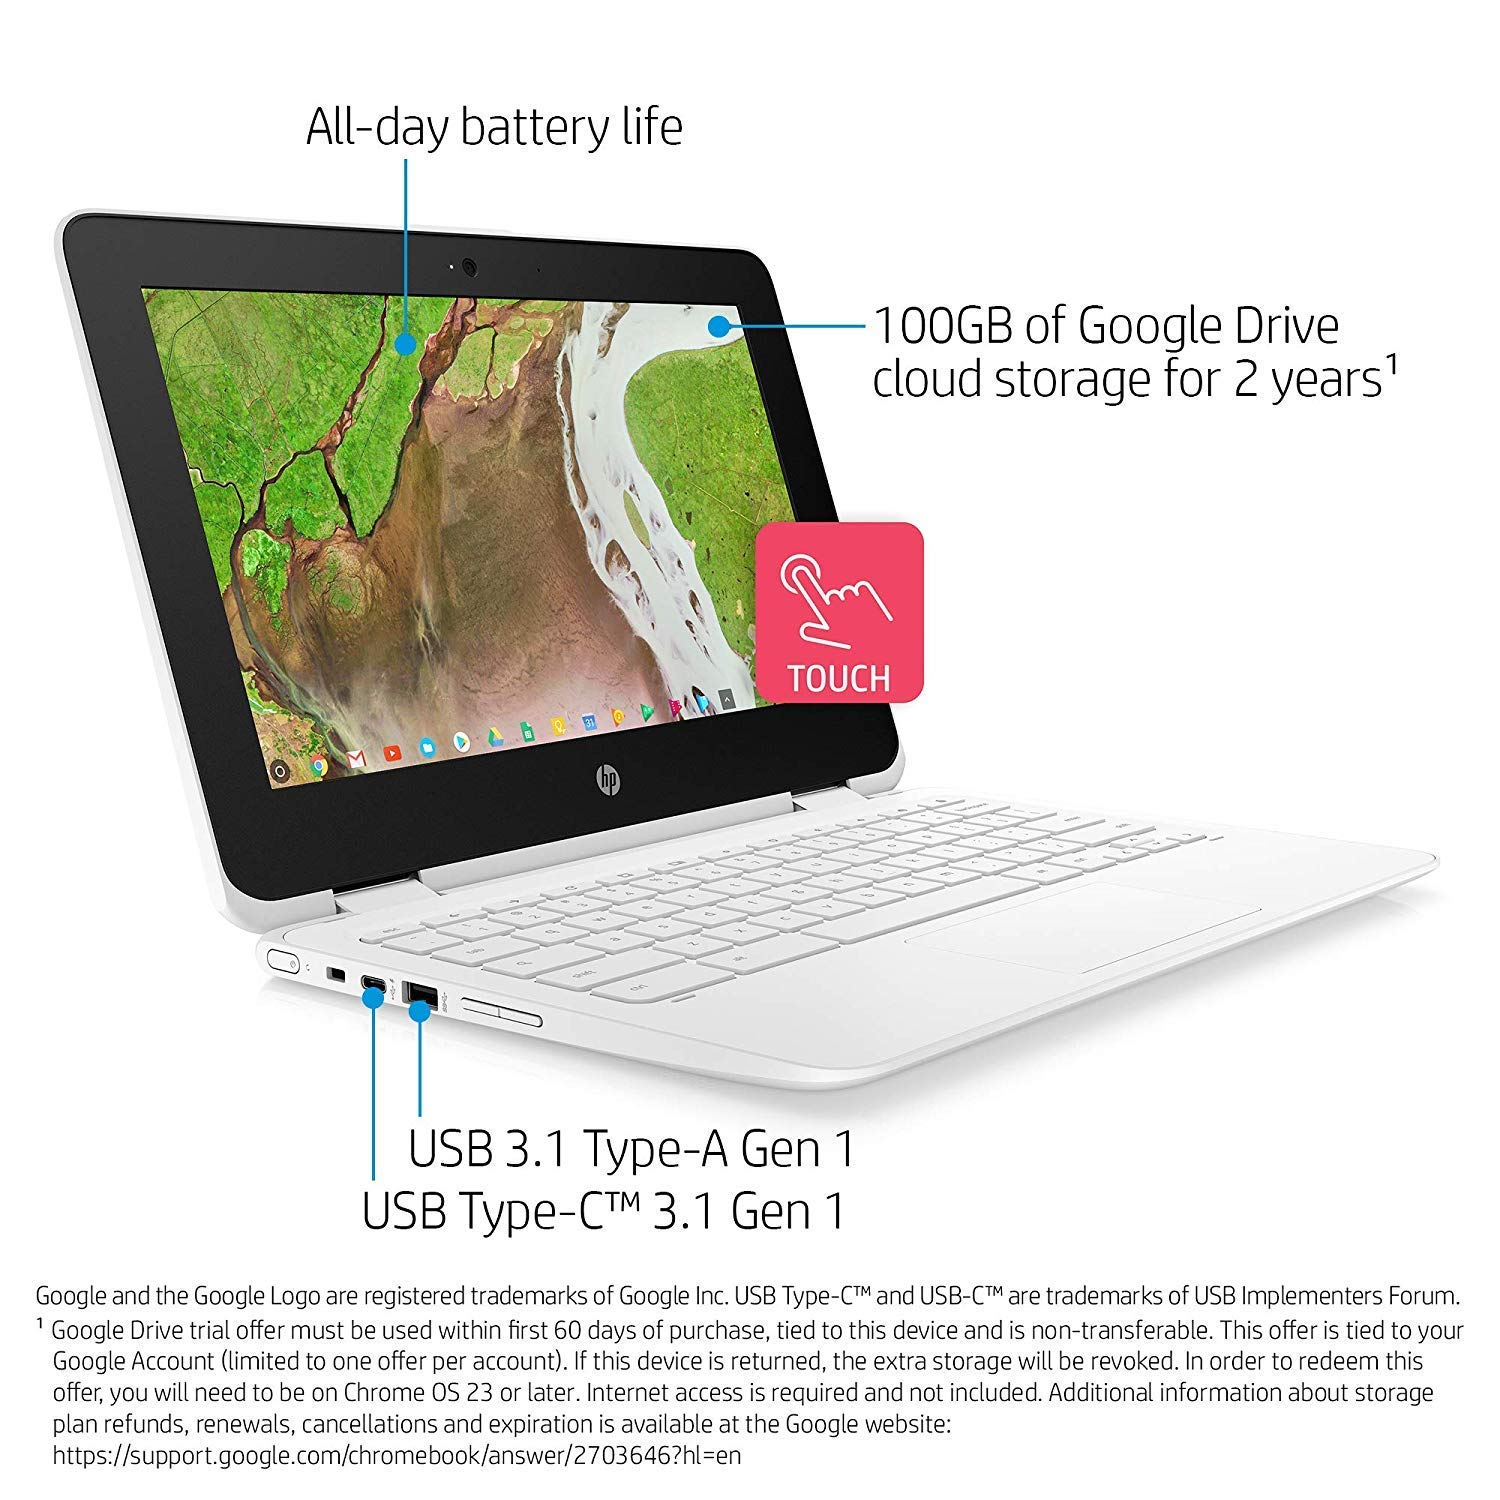 2019 HP Chromebook X360 Convertible 11.6” HD Touchscreen 2-in-1 Tablet Laptop Computer, Intel Celeron N3350 up to 2.4GHz, 4GB DDR4 RAM, 32GB eMMC, 802.11AC WiFi, Bluetooth 4.2, USB 3.1, Chrome OS